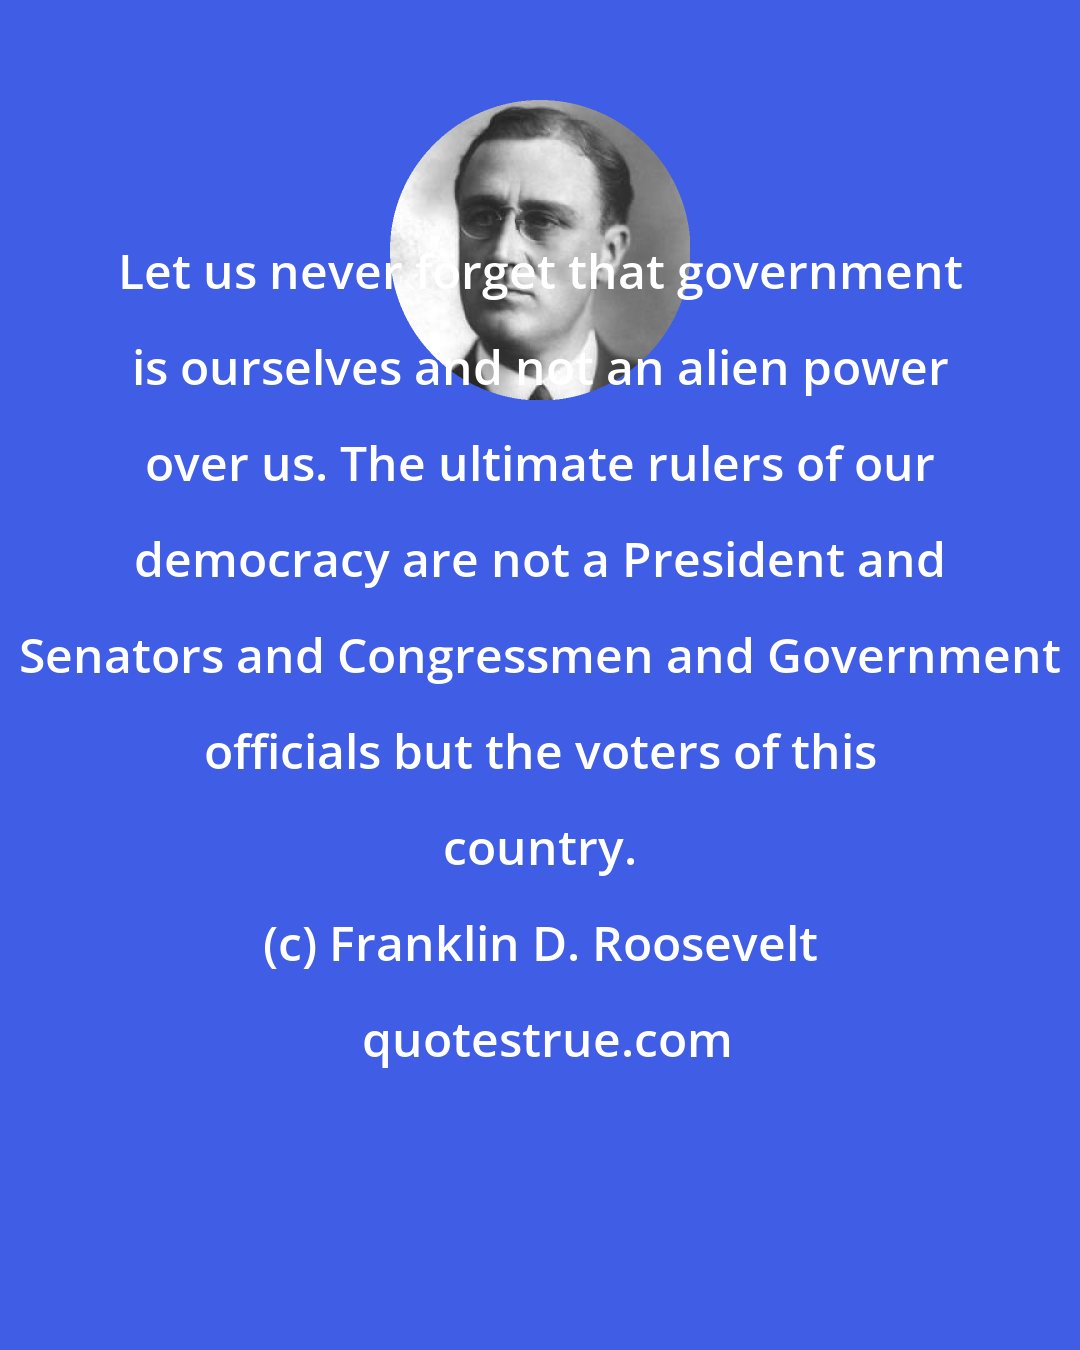 Franklin D. Roosevelt: Let us never forget that government is ourselves and not an alien power over us. The ultimate rulers of our democracy are not a President and Senators and Congressmen and Government officials but the voters of this country.